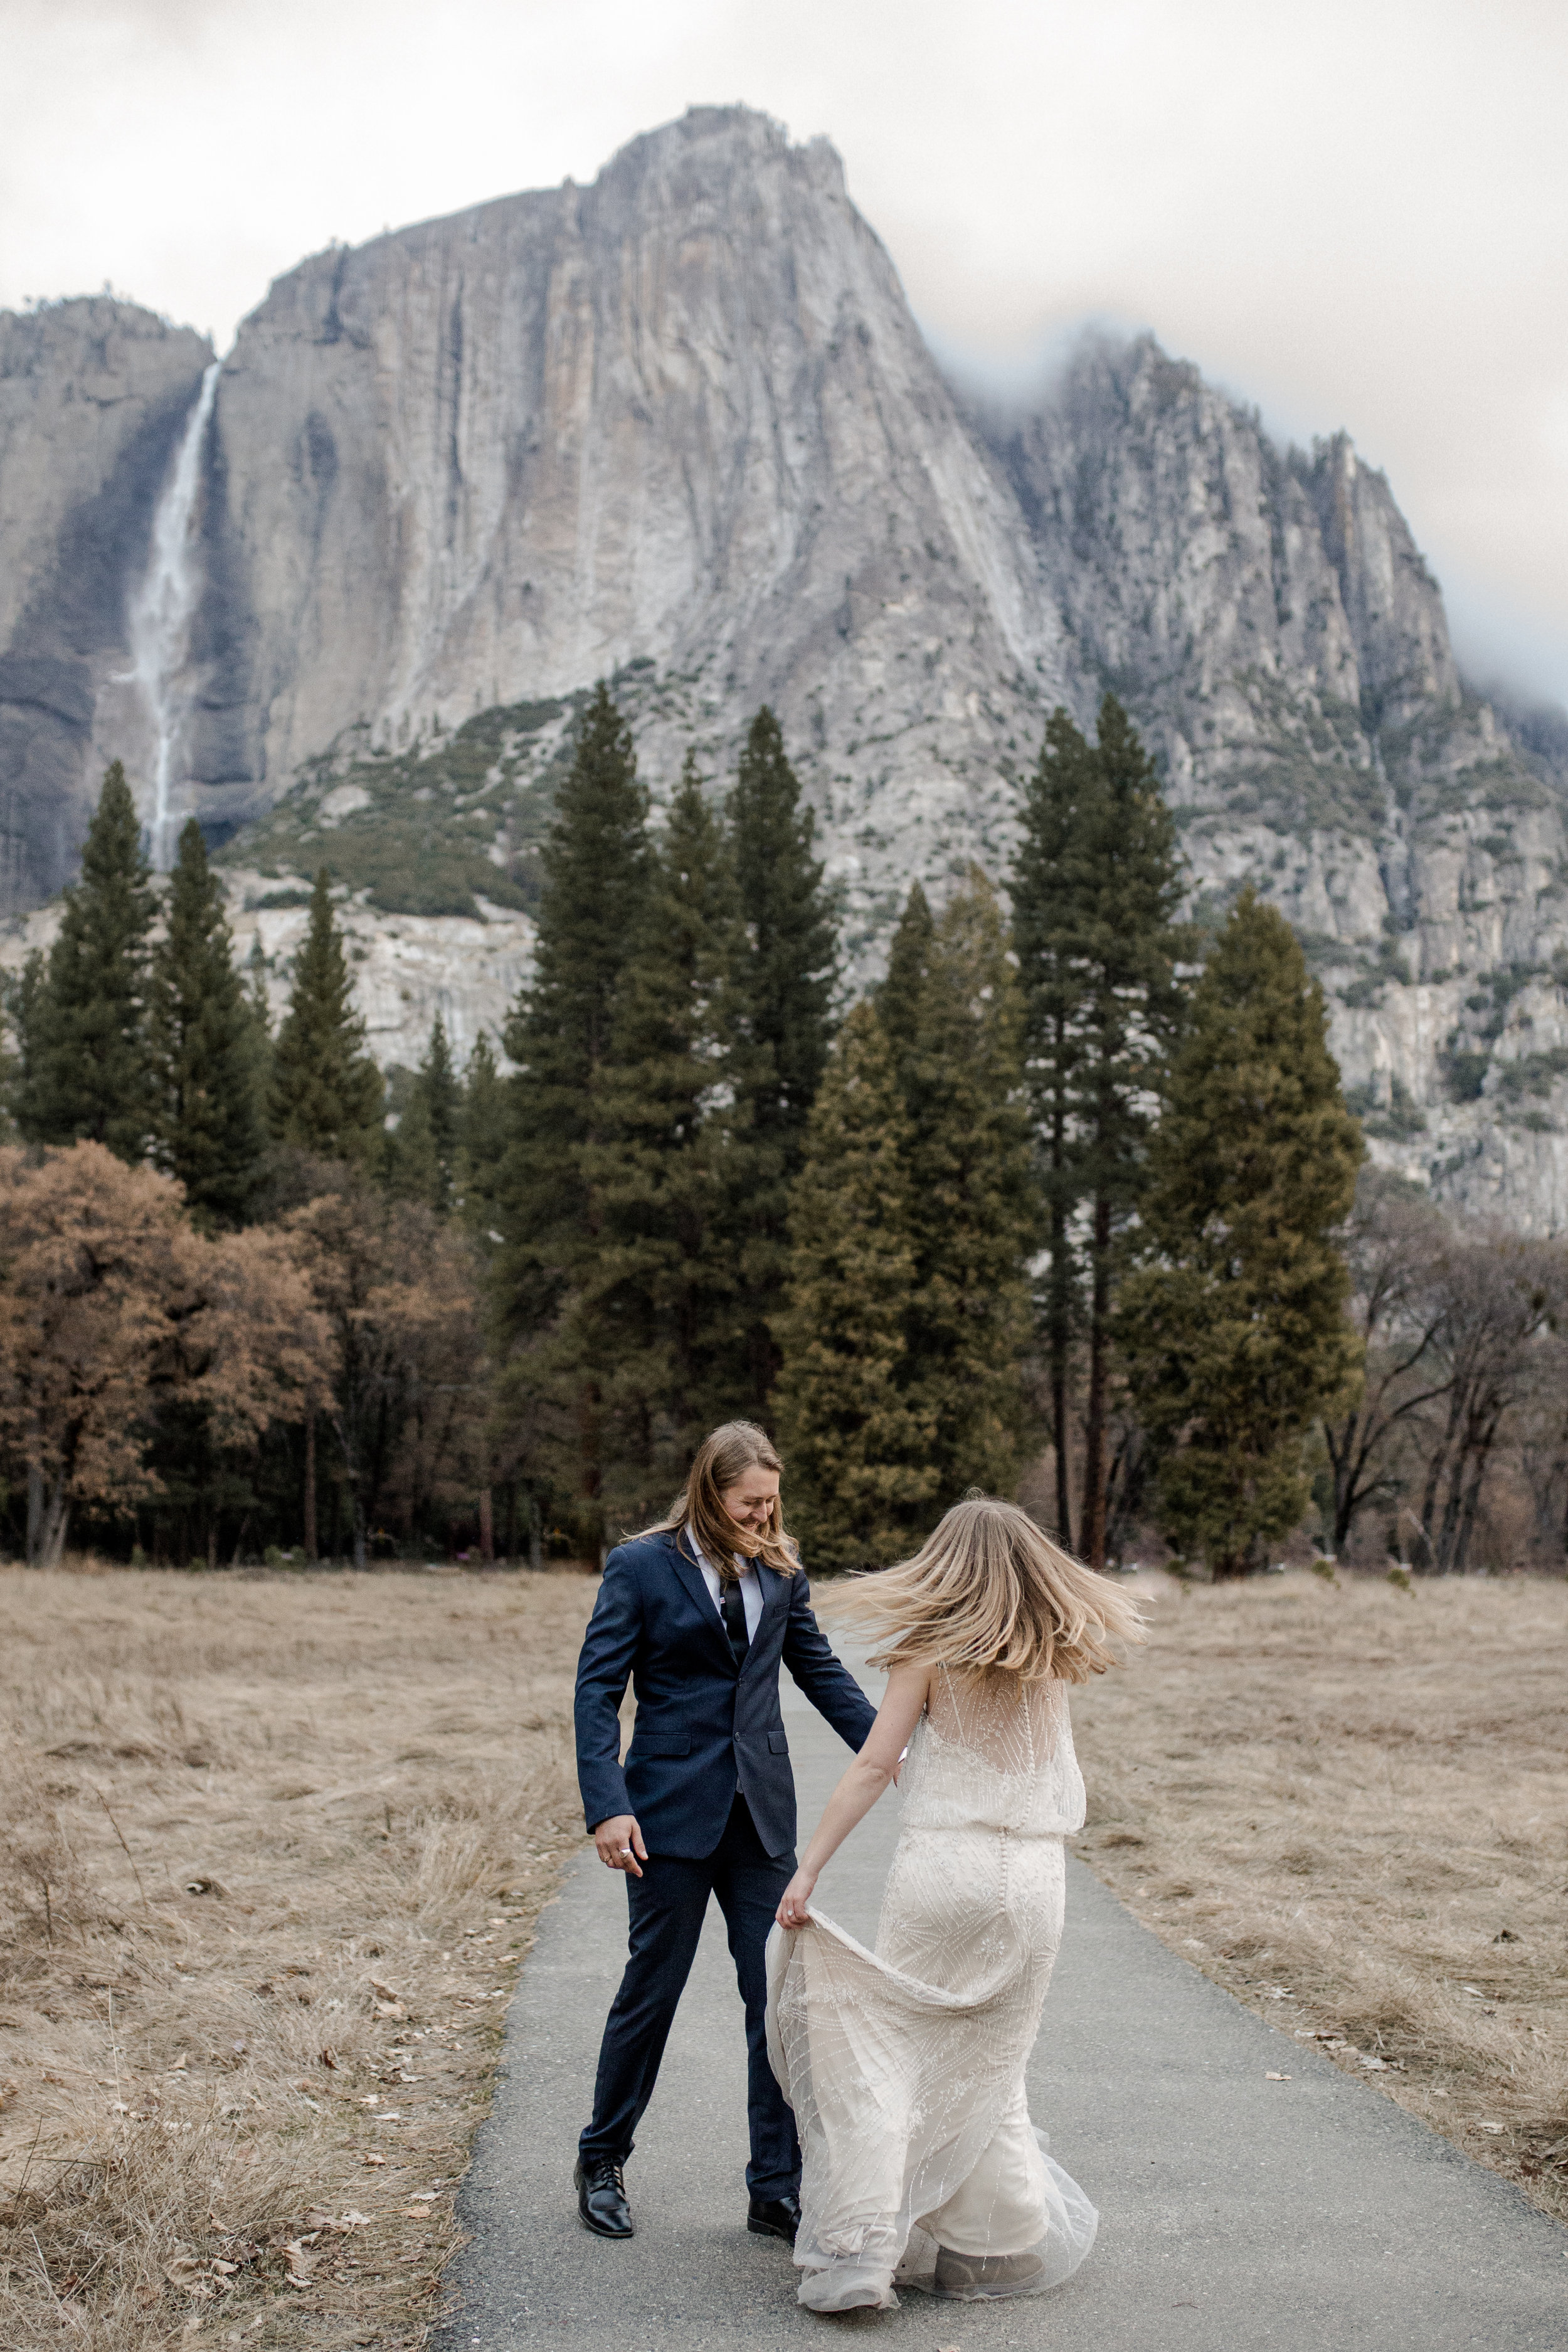 nicole-daacke-photography-yousemite-national-park-elopement-photographer-winter-cloud-moody-elope-inspiration-yosemite-valley-tunnel-view-winter-cloud-fog-weather-wedding-photos-27.jpg